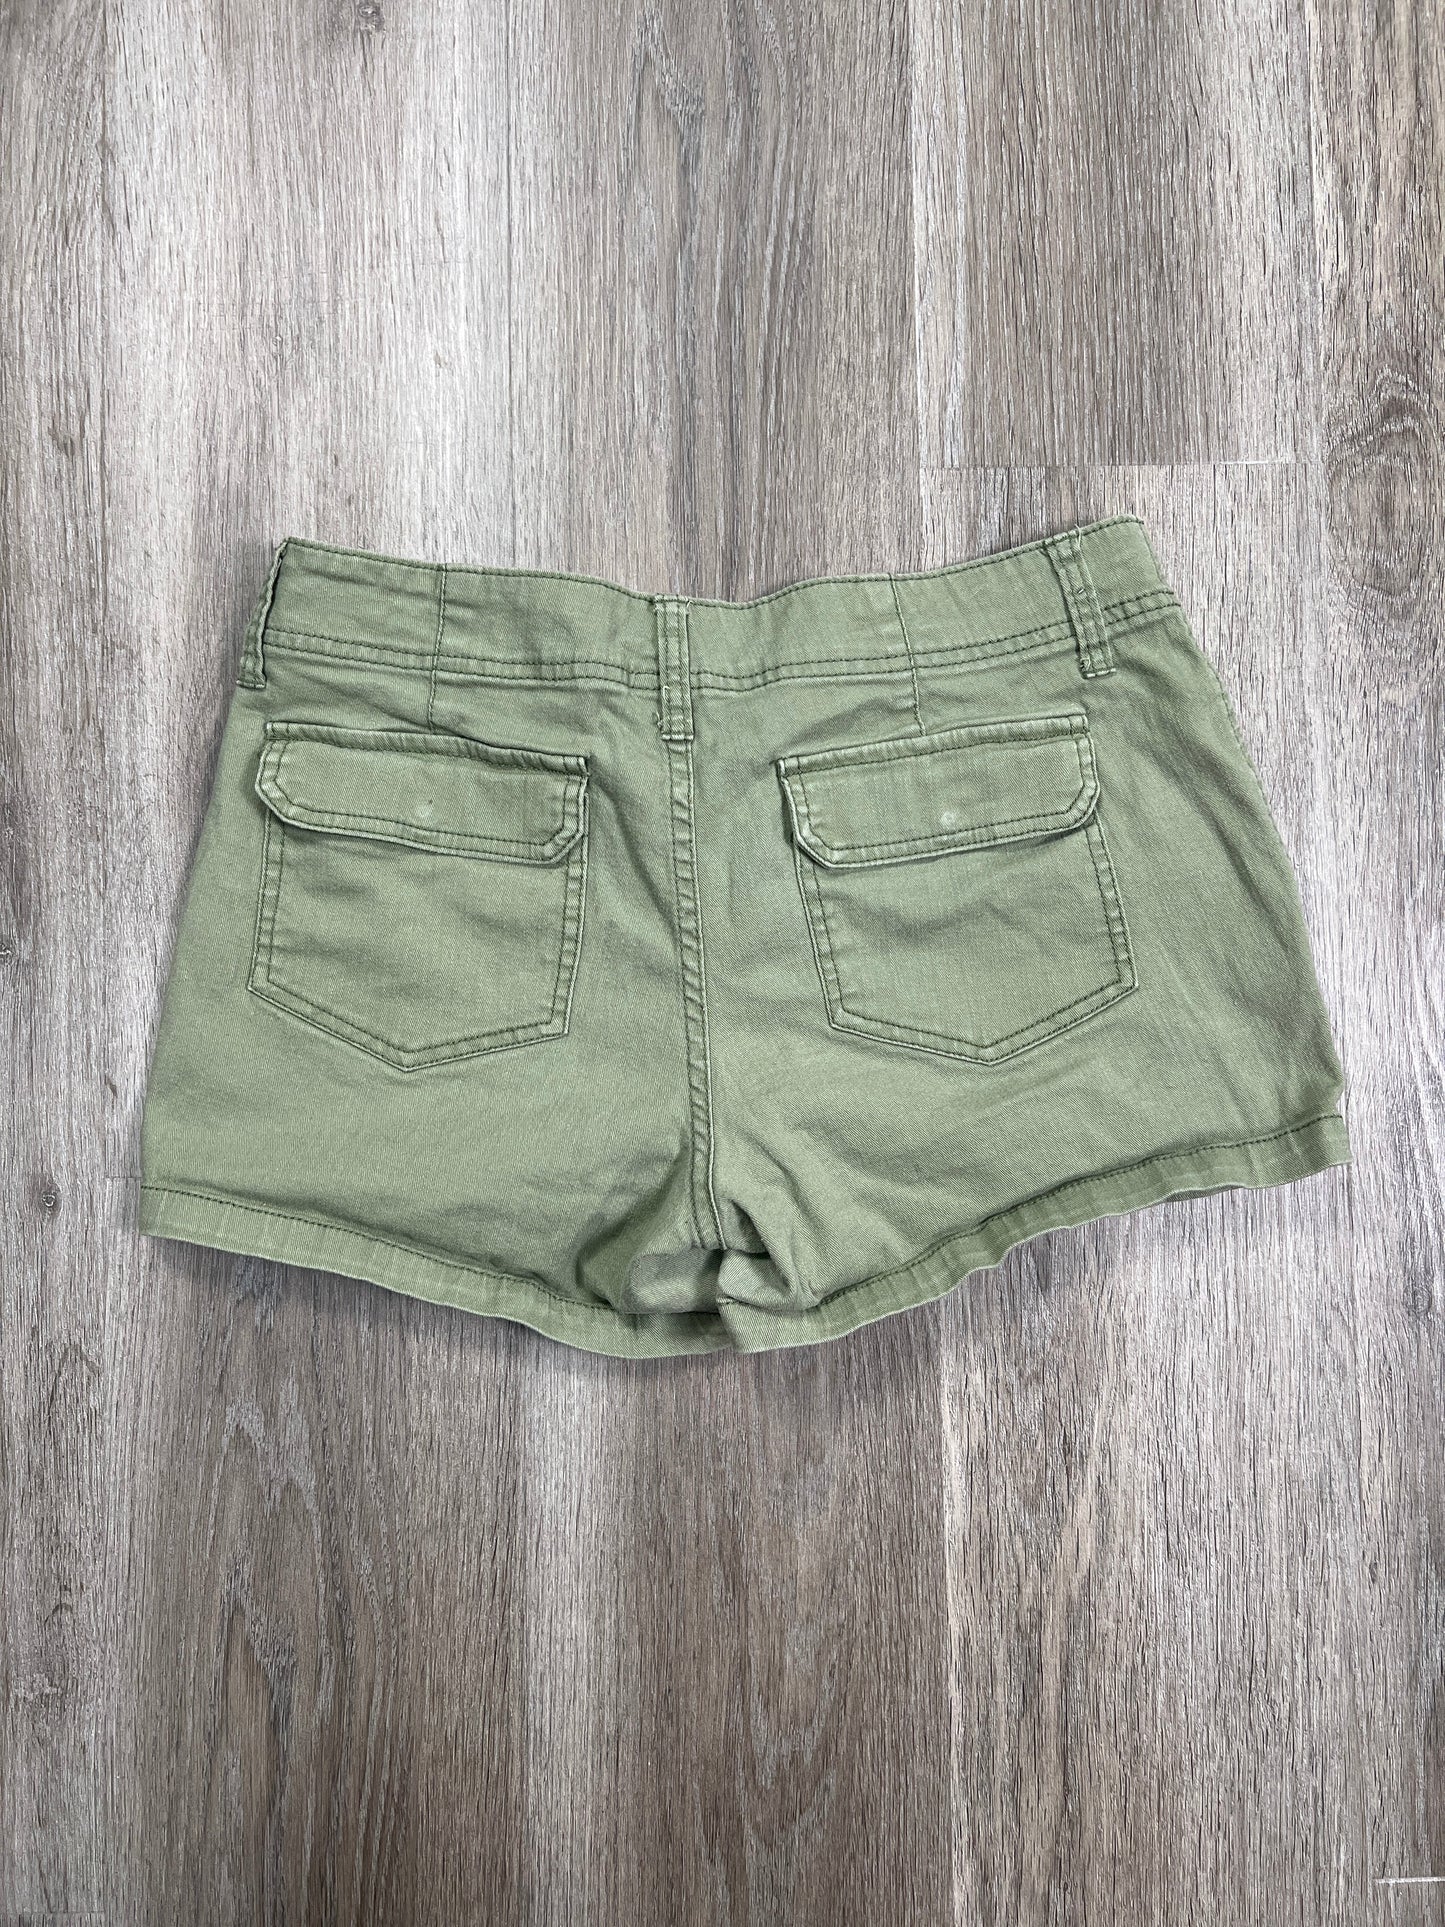 Shorts By Faded Glory  Size: M